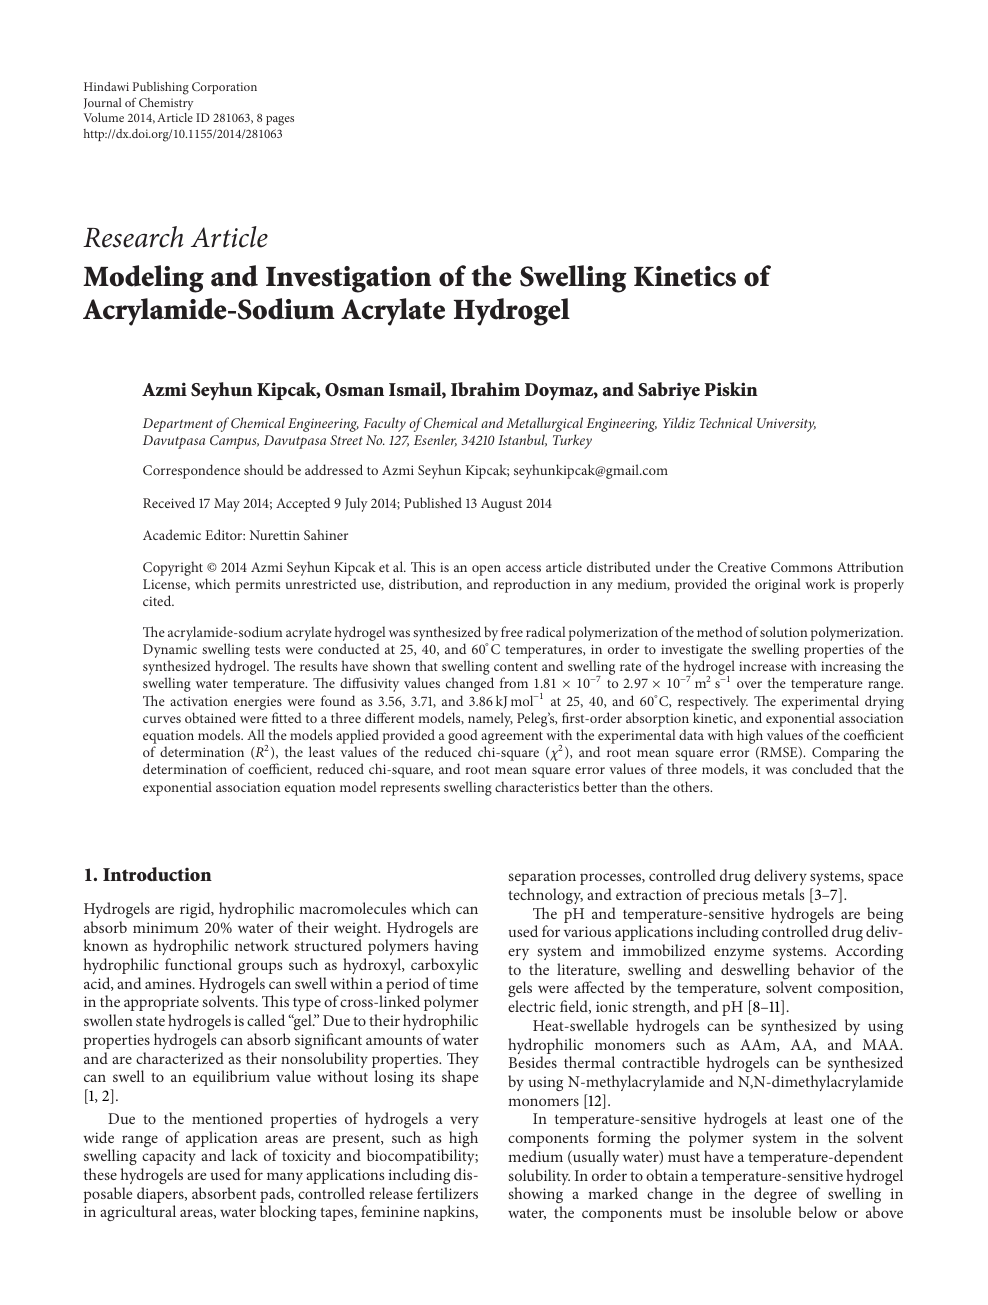 Modeling and Investigation of the Swelling Kinetics of Acrylamide-Sodium  Acrylate Hydrogel – topic of research paper in Chemical sciences. Download  scholarly article PDF and read for free on CyberLeninka open science hub.